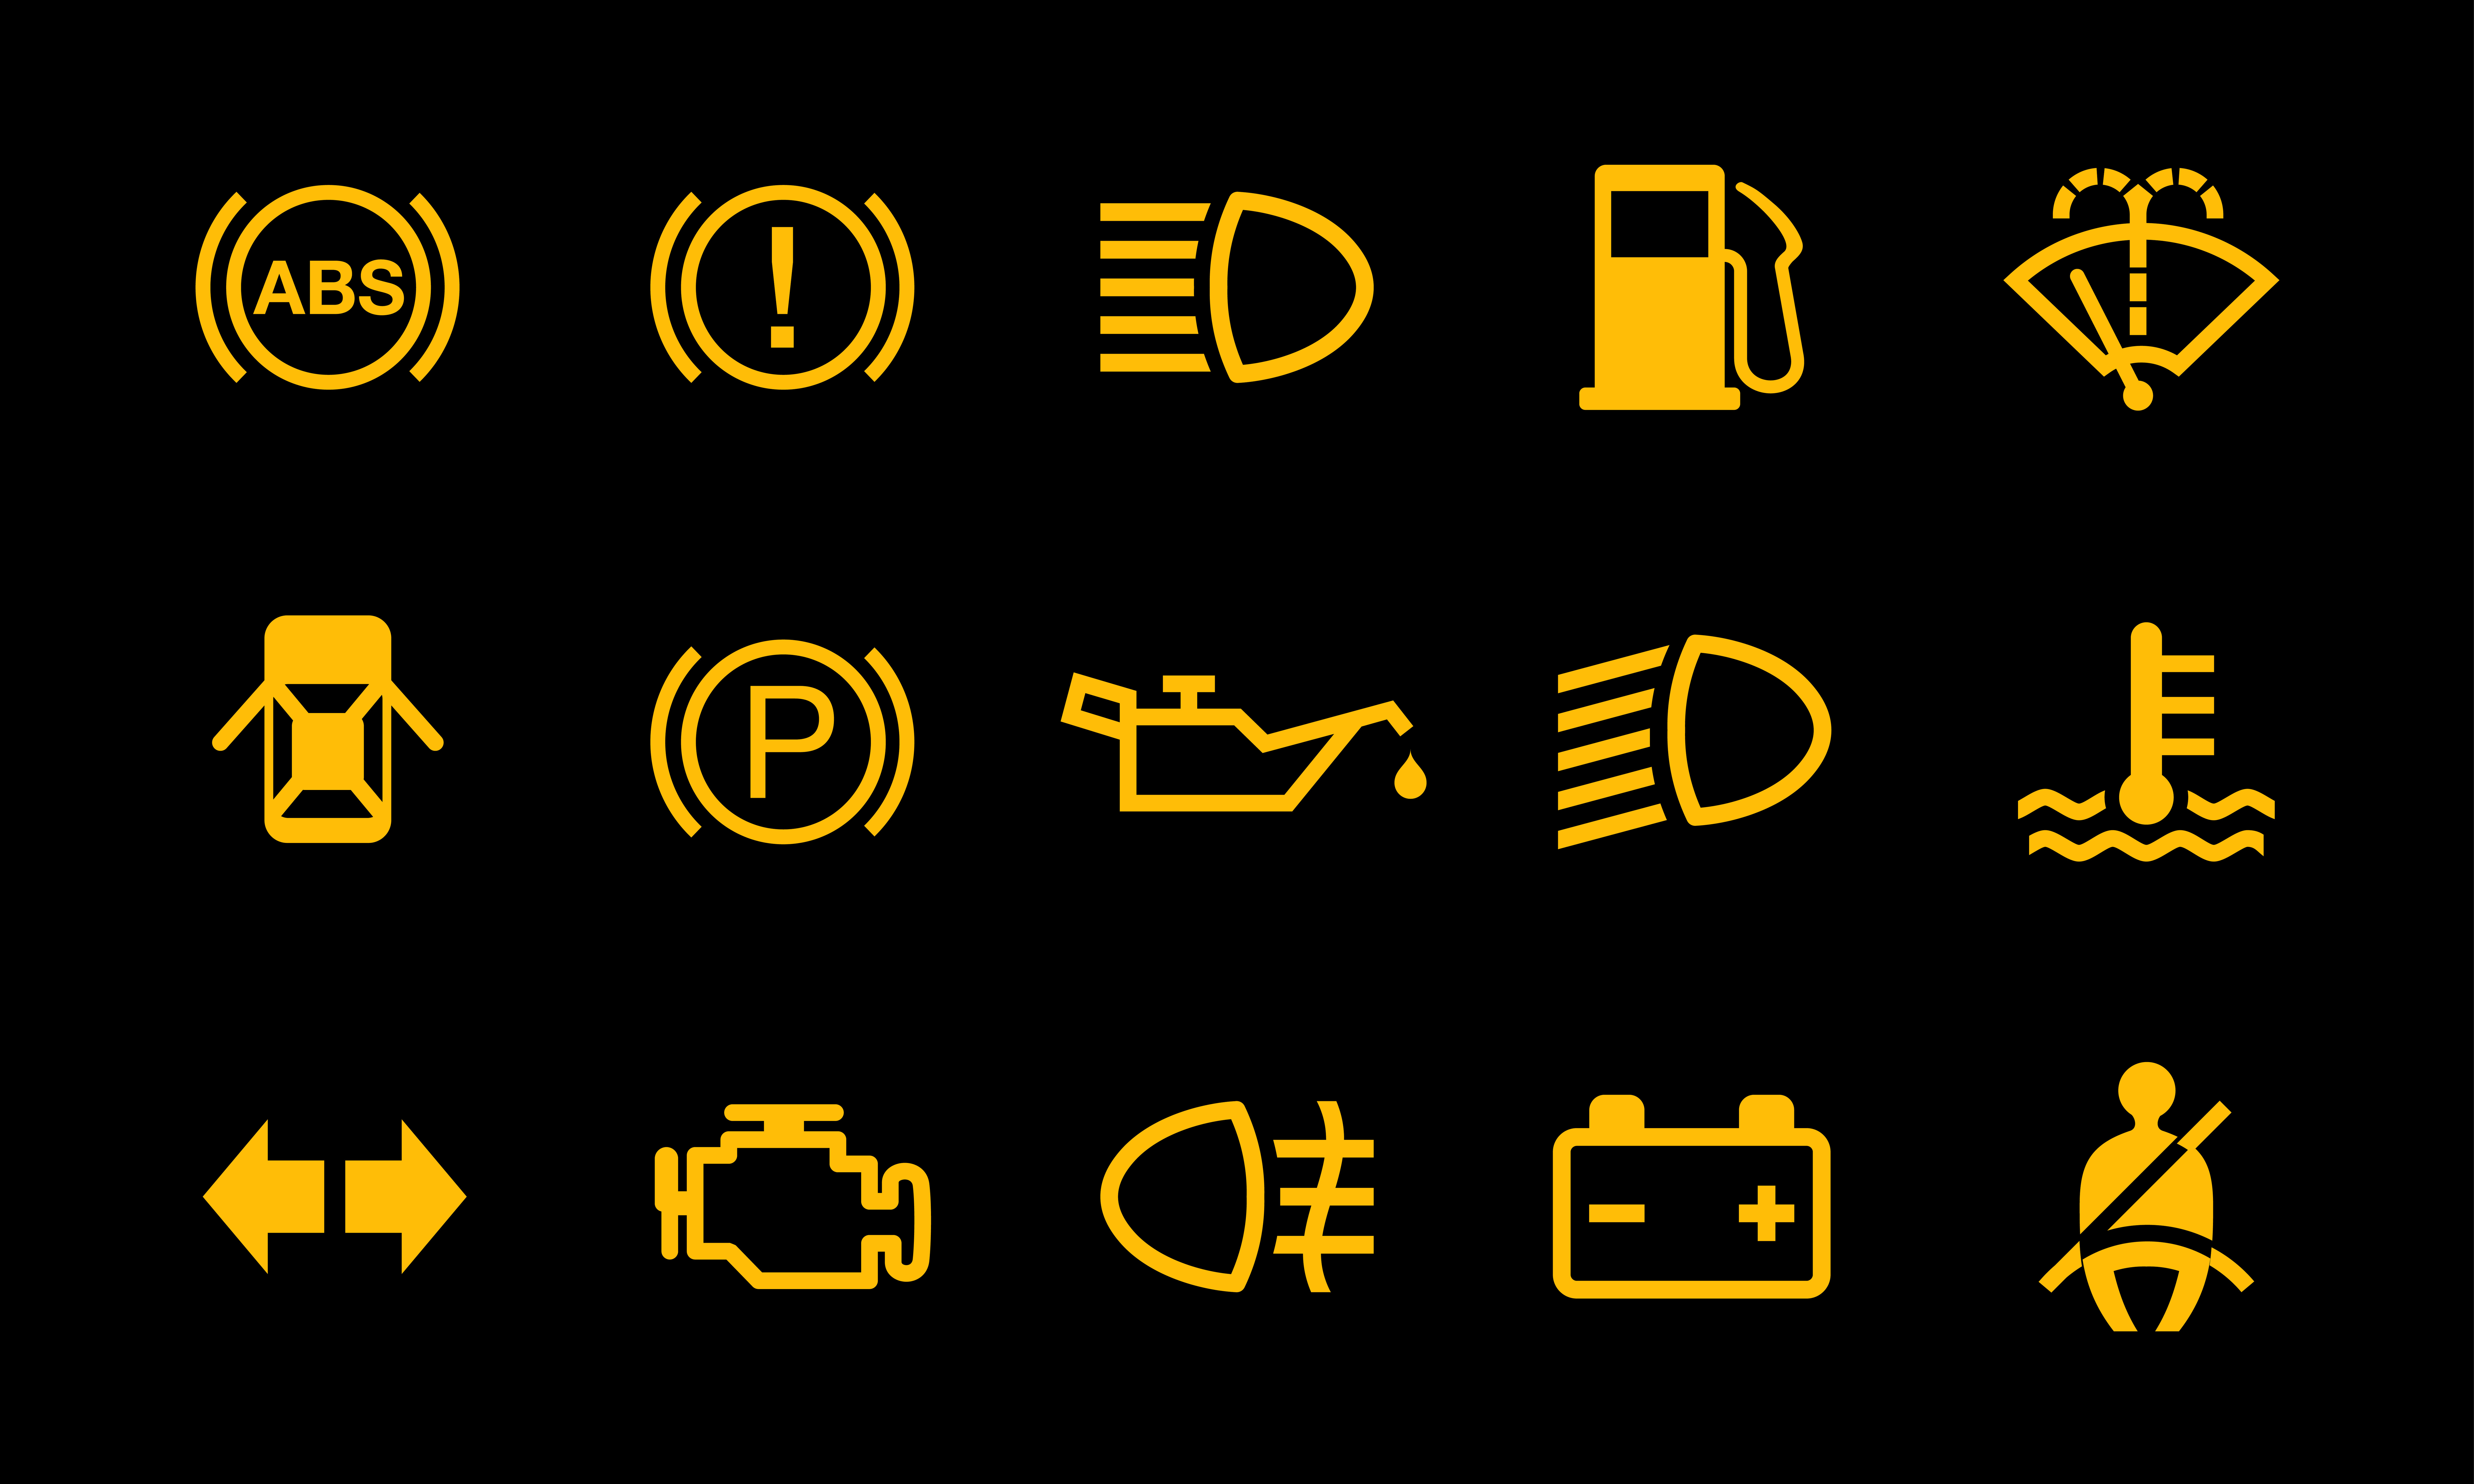 Dashboard Warning Lights on Your Ford Dashboard: What They Mean